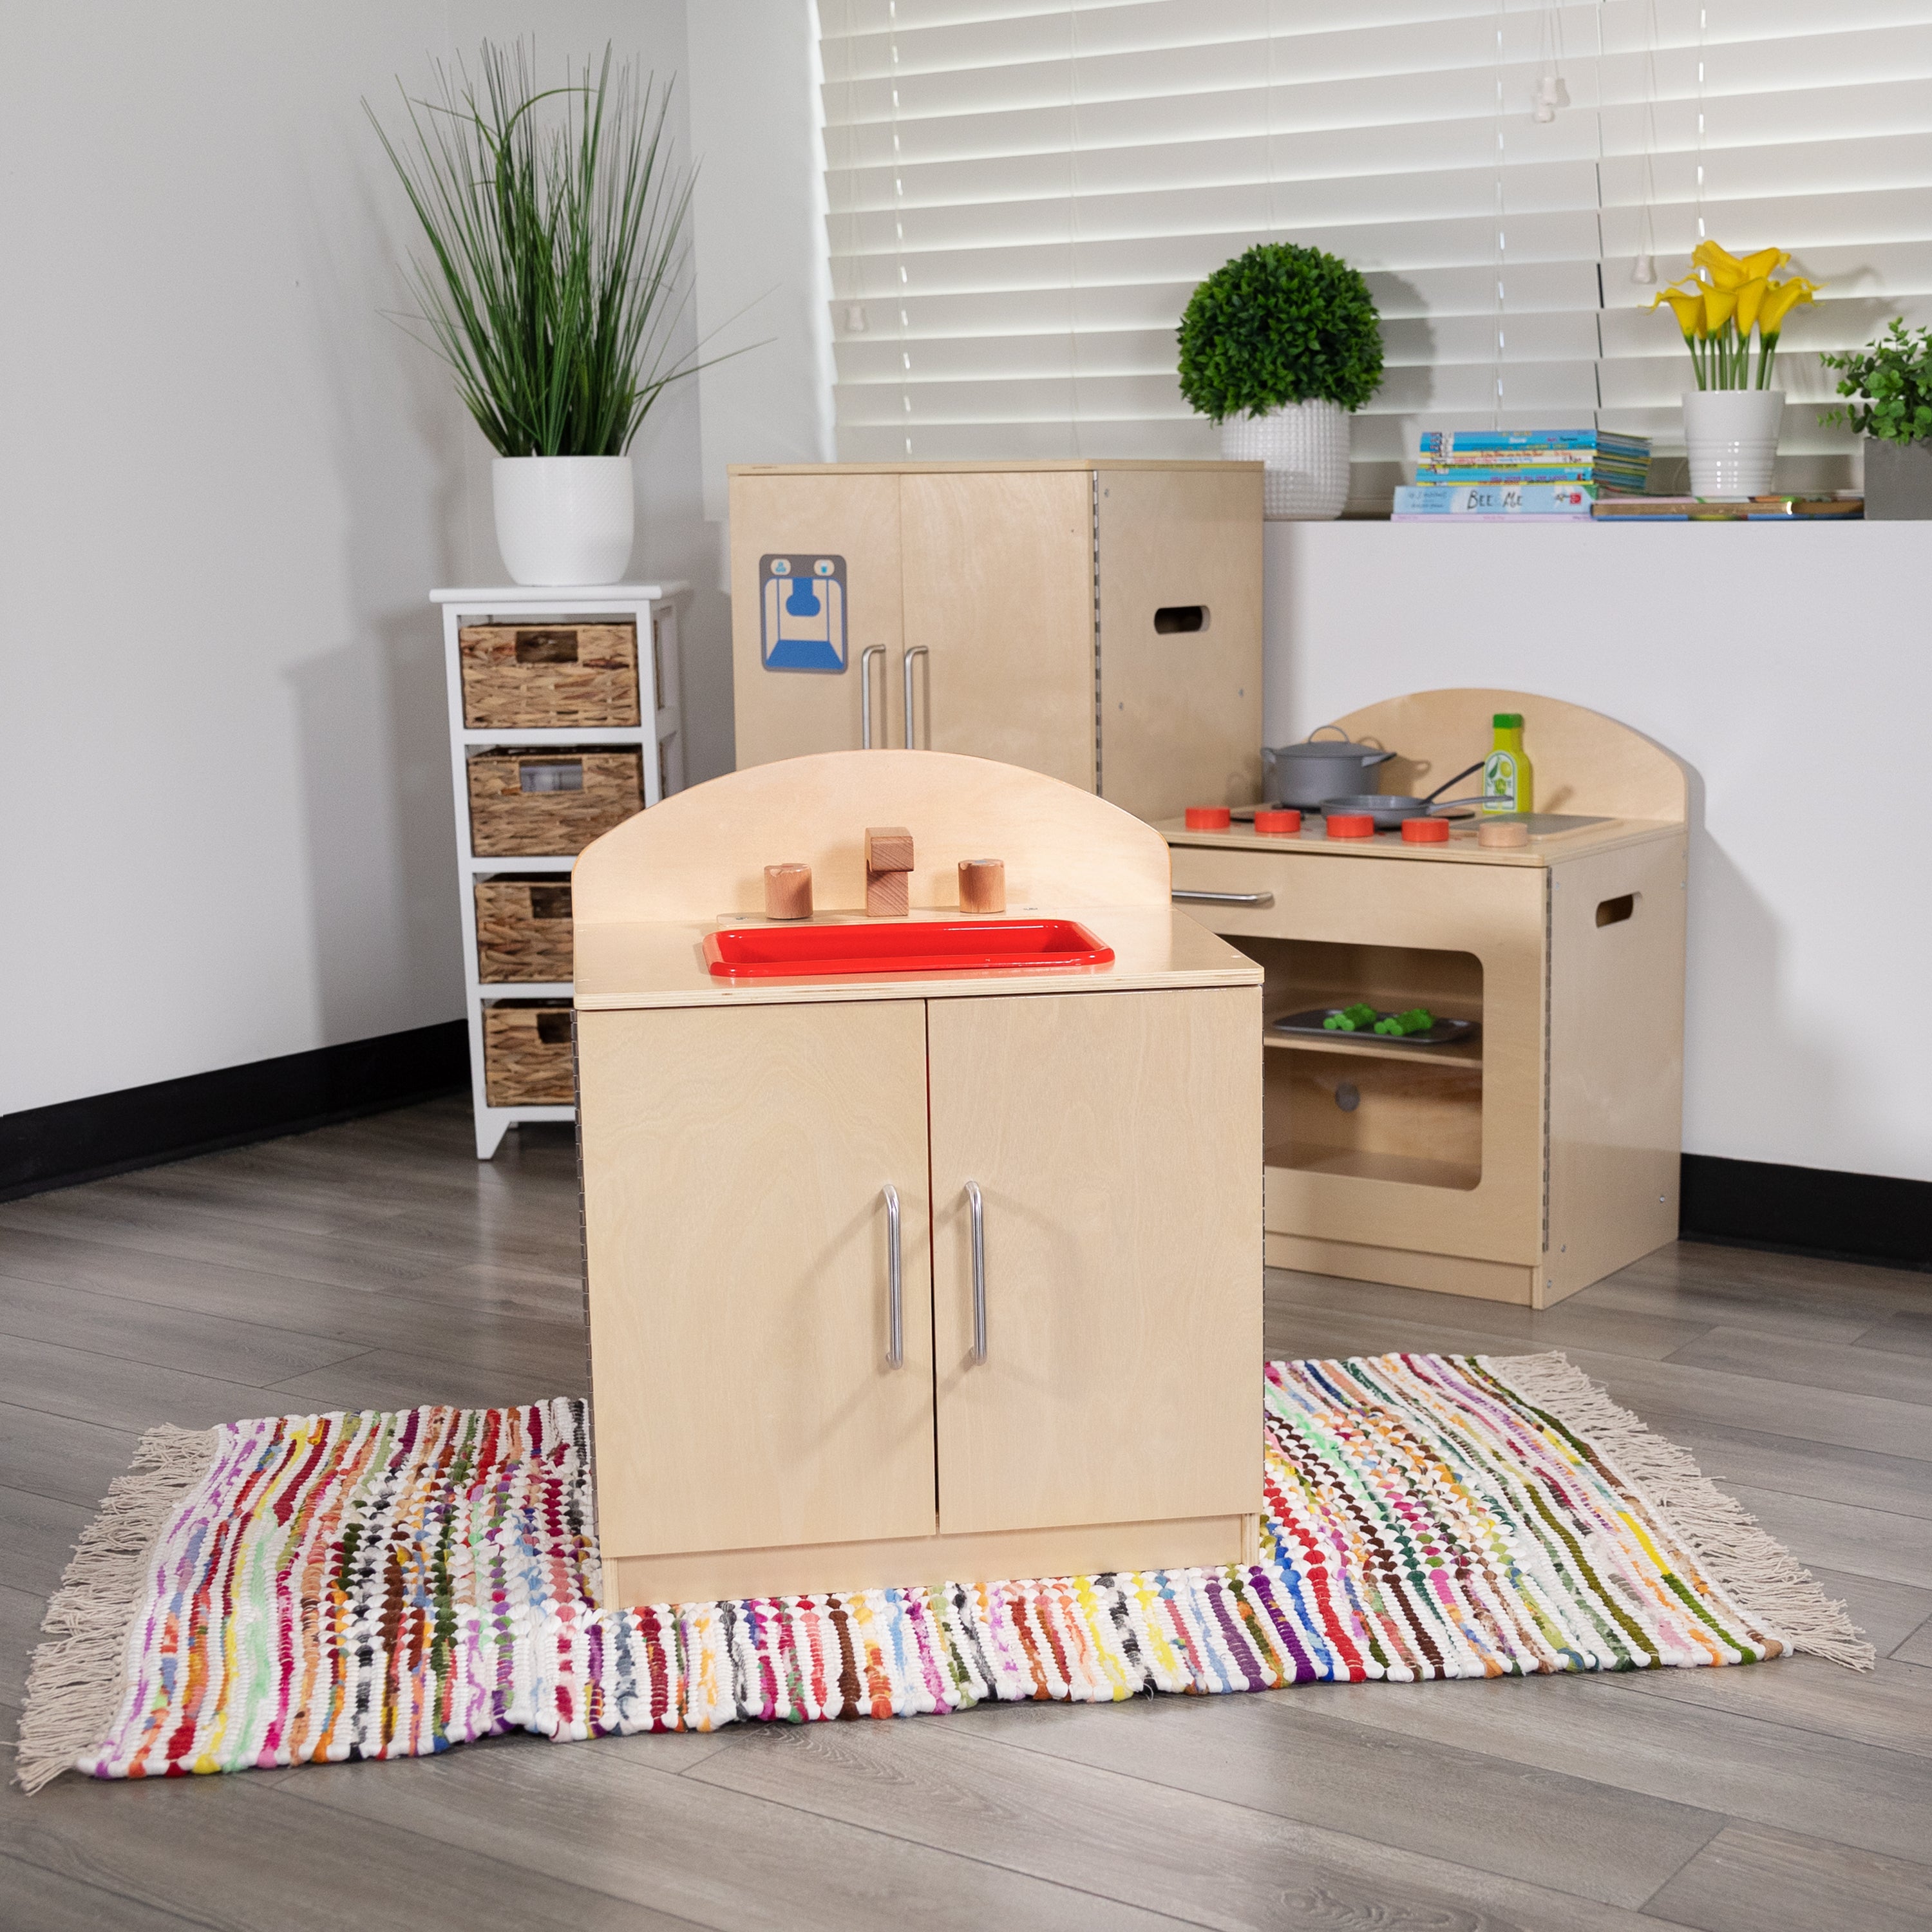 Children's Wooden Kitchen Sink for Commercial or Home Use - Safe, Kid Friendly Design-Dramatic Play-Flash Furniture-Wall2Wall Furnishings